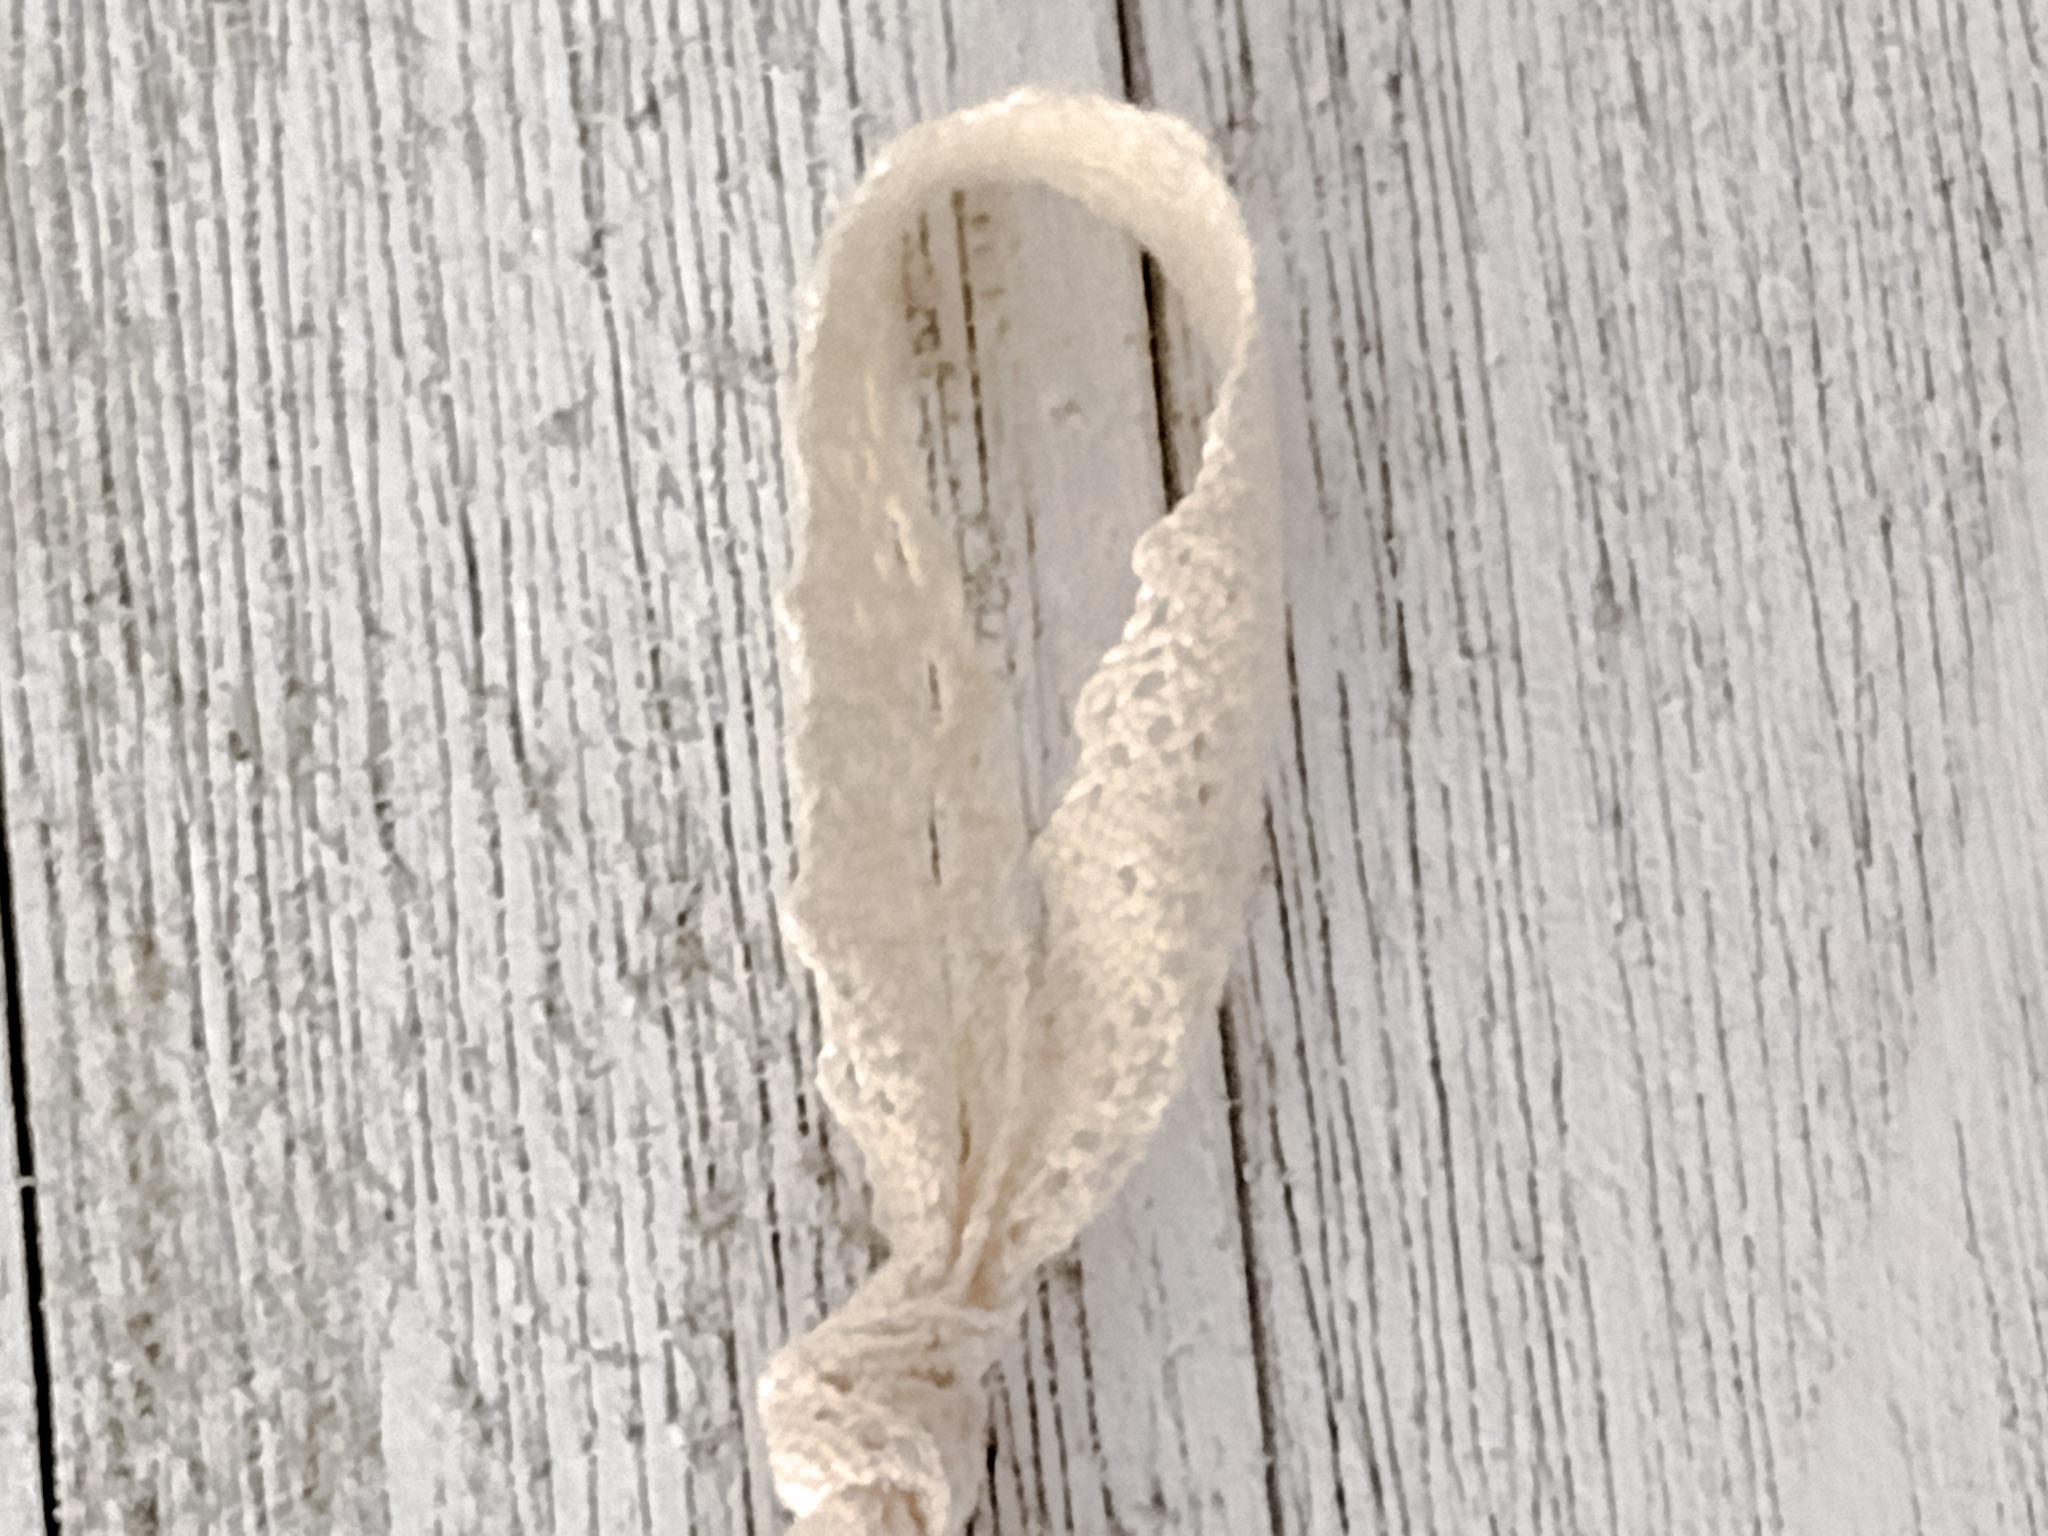 slip knot with lace ribbon